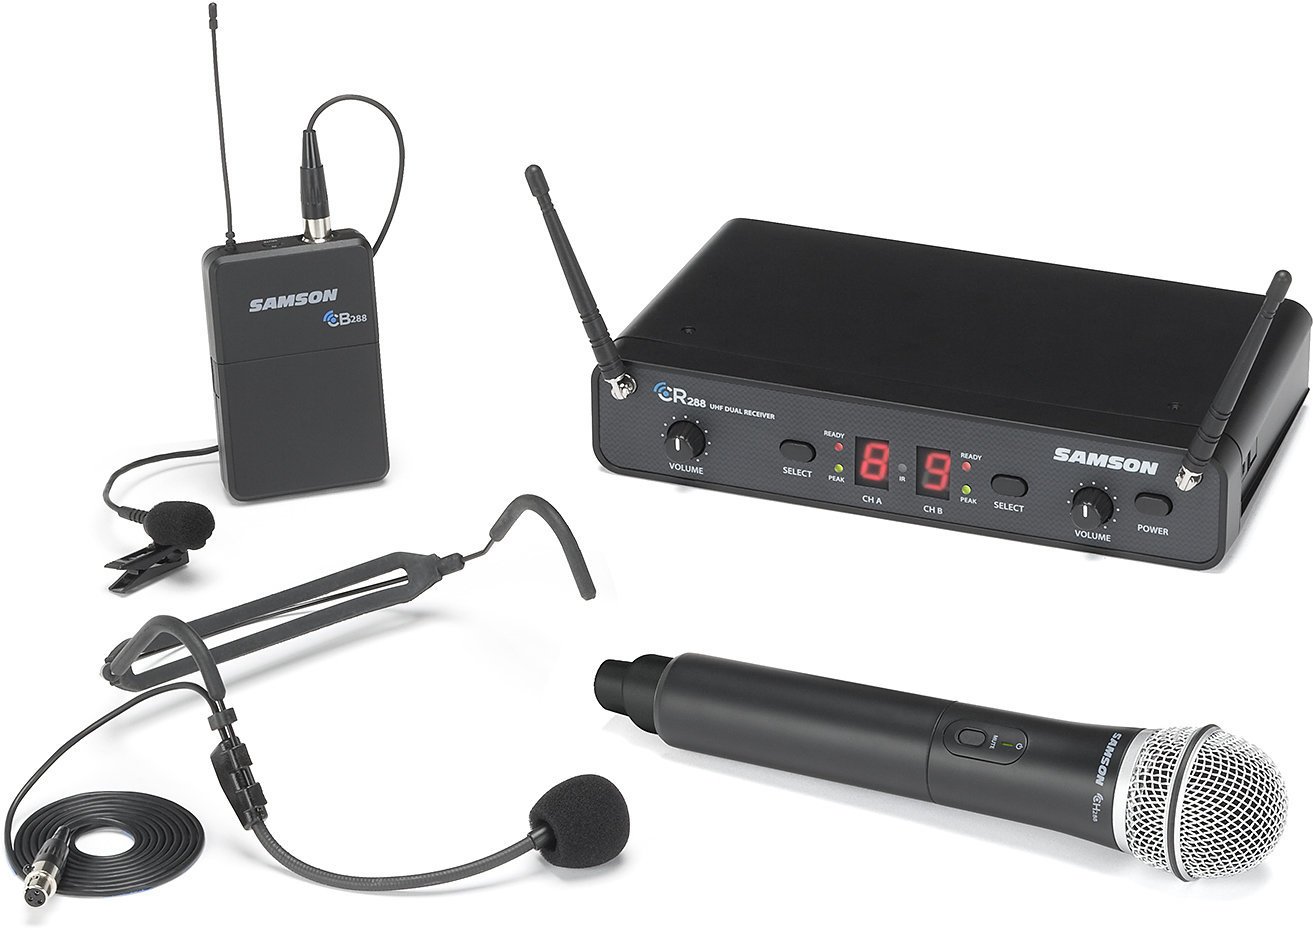 Wireless system-Combi Samson Concert 288 All-In-One (Just unboxed)